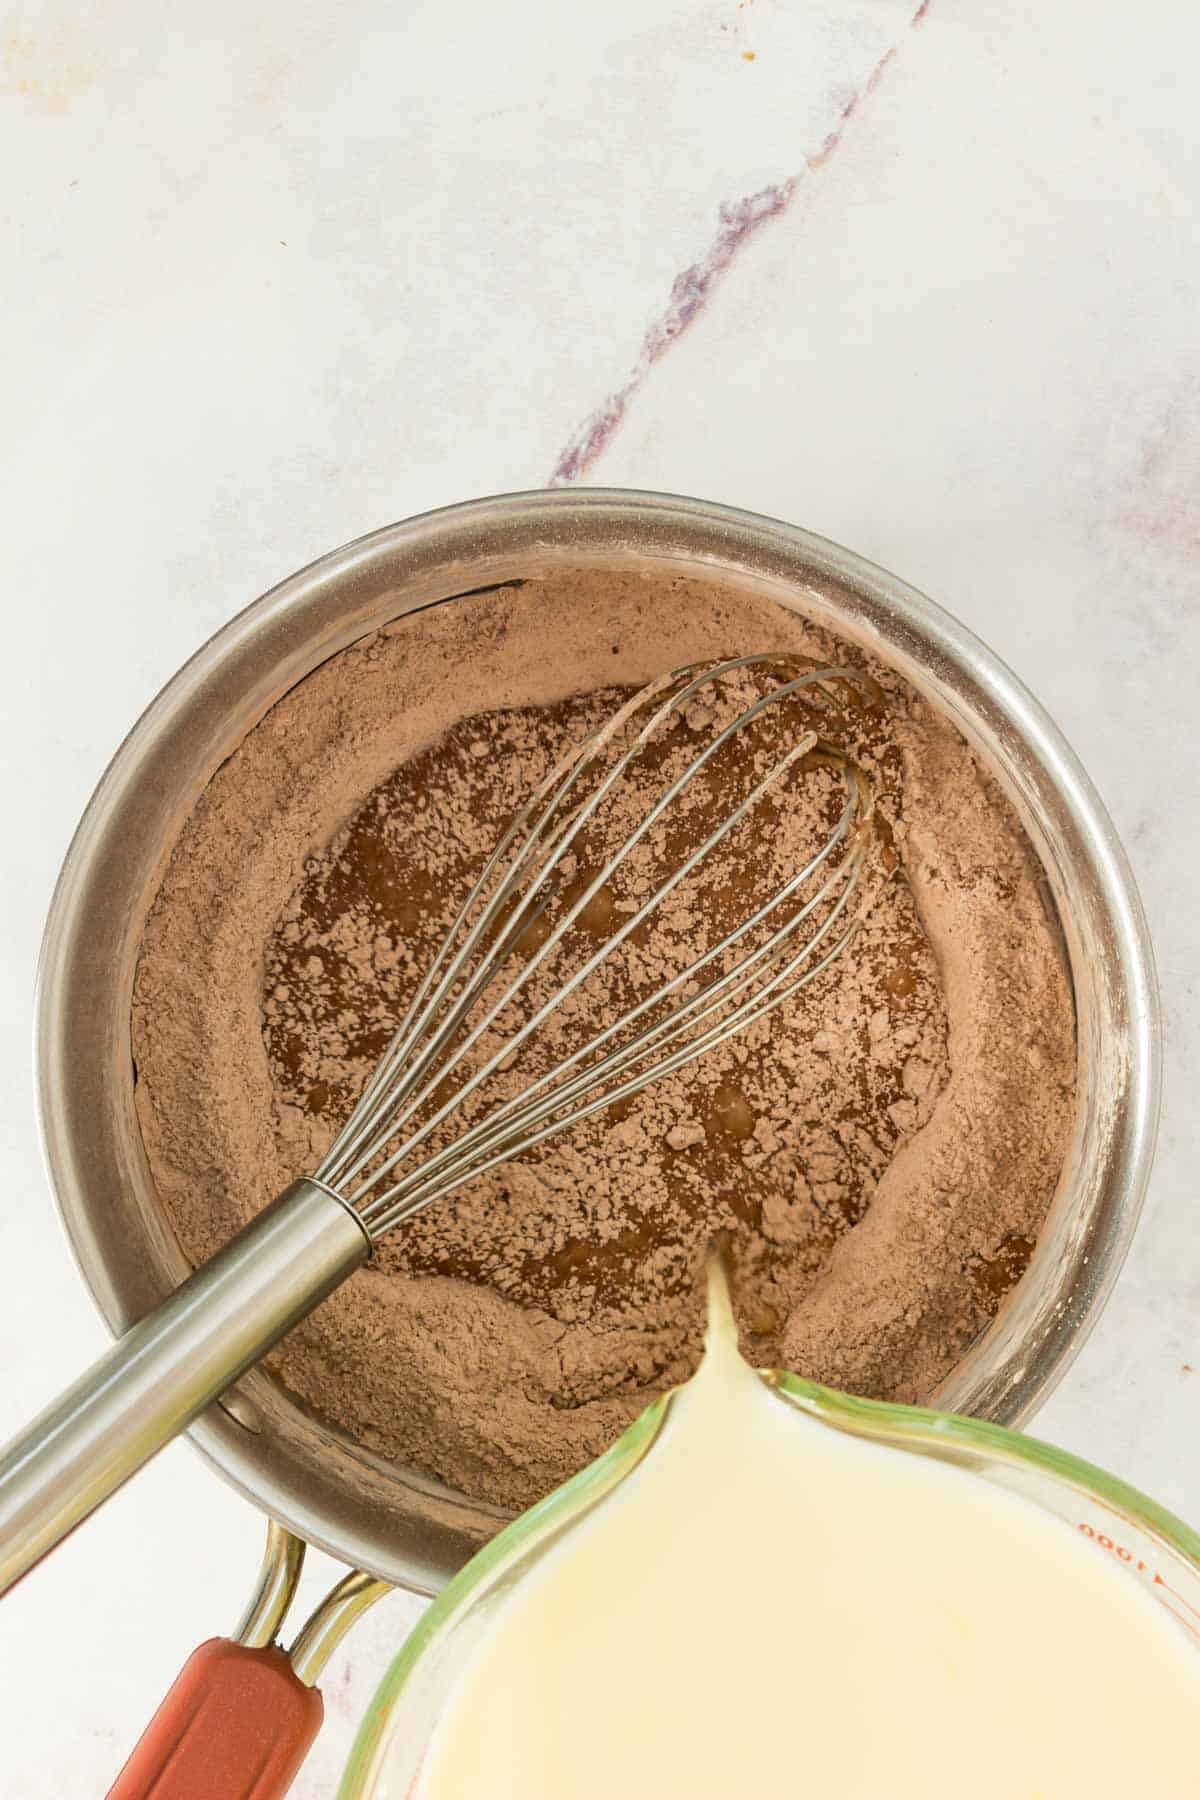 Milk mixture is added into a saucepan with sugar and cocoa powder.